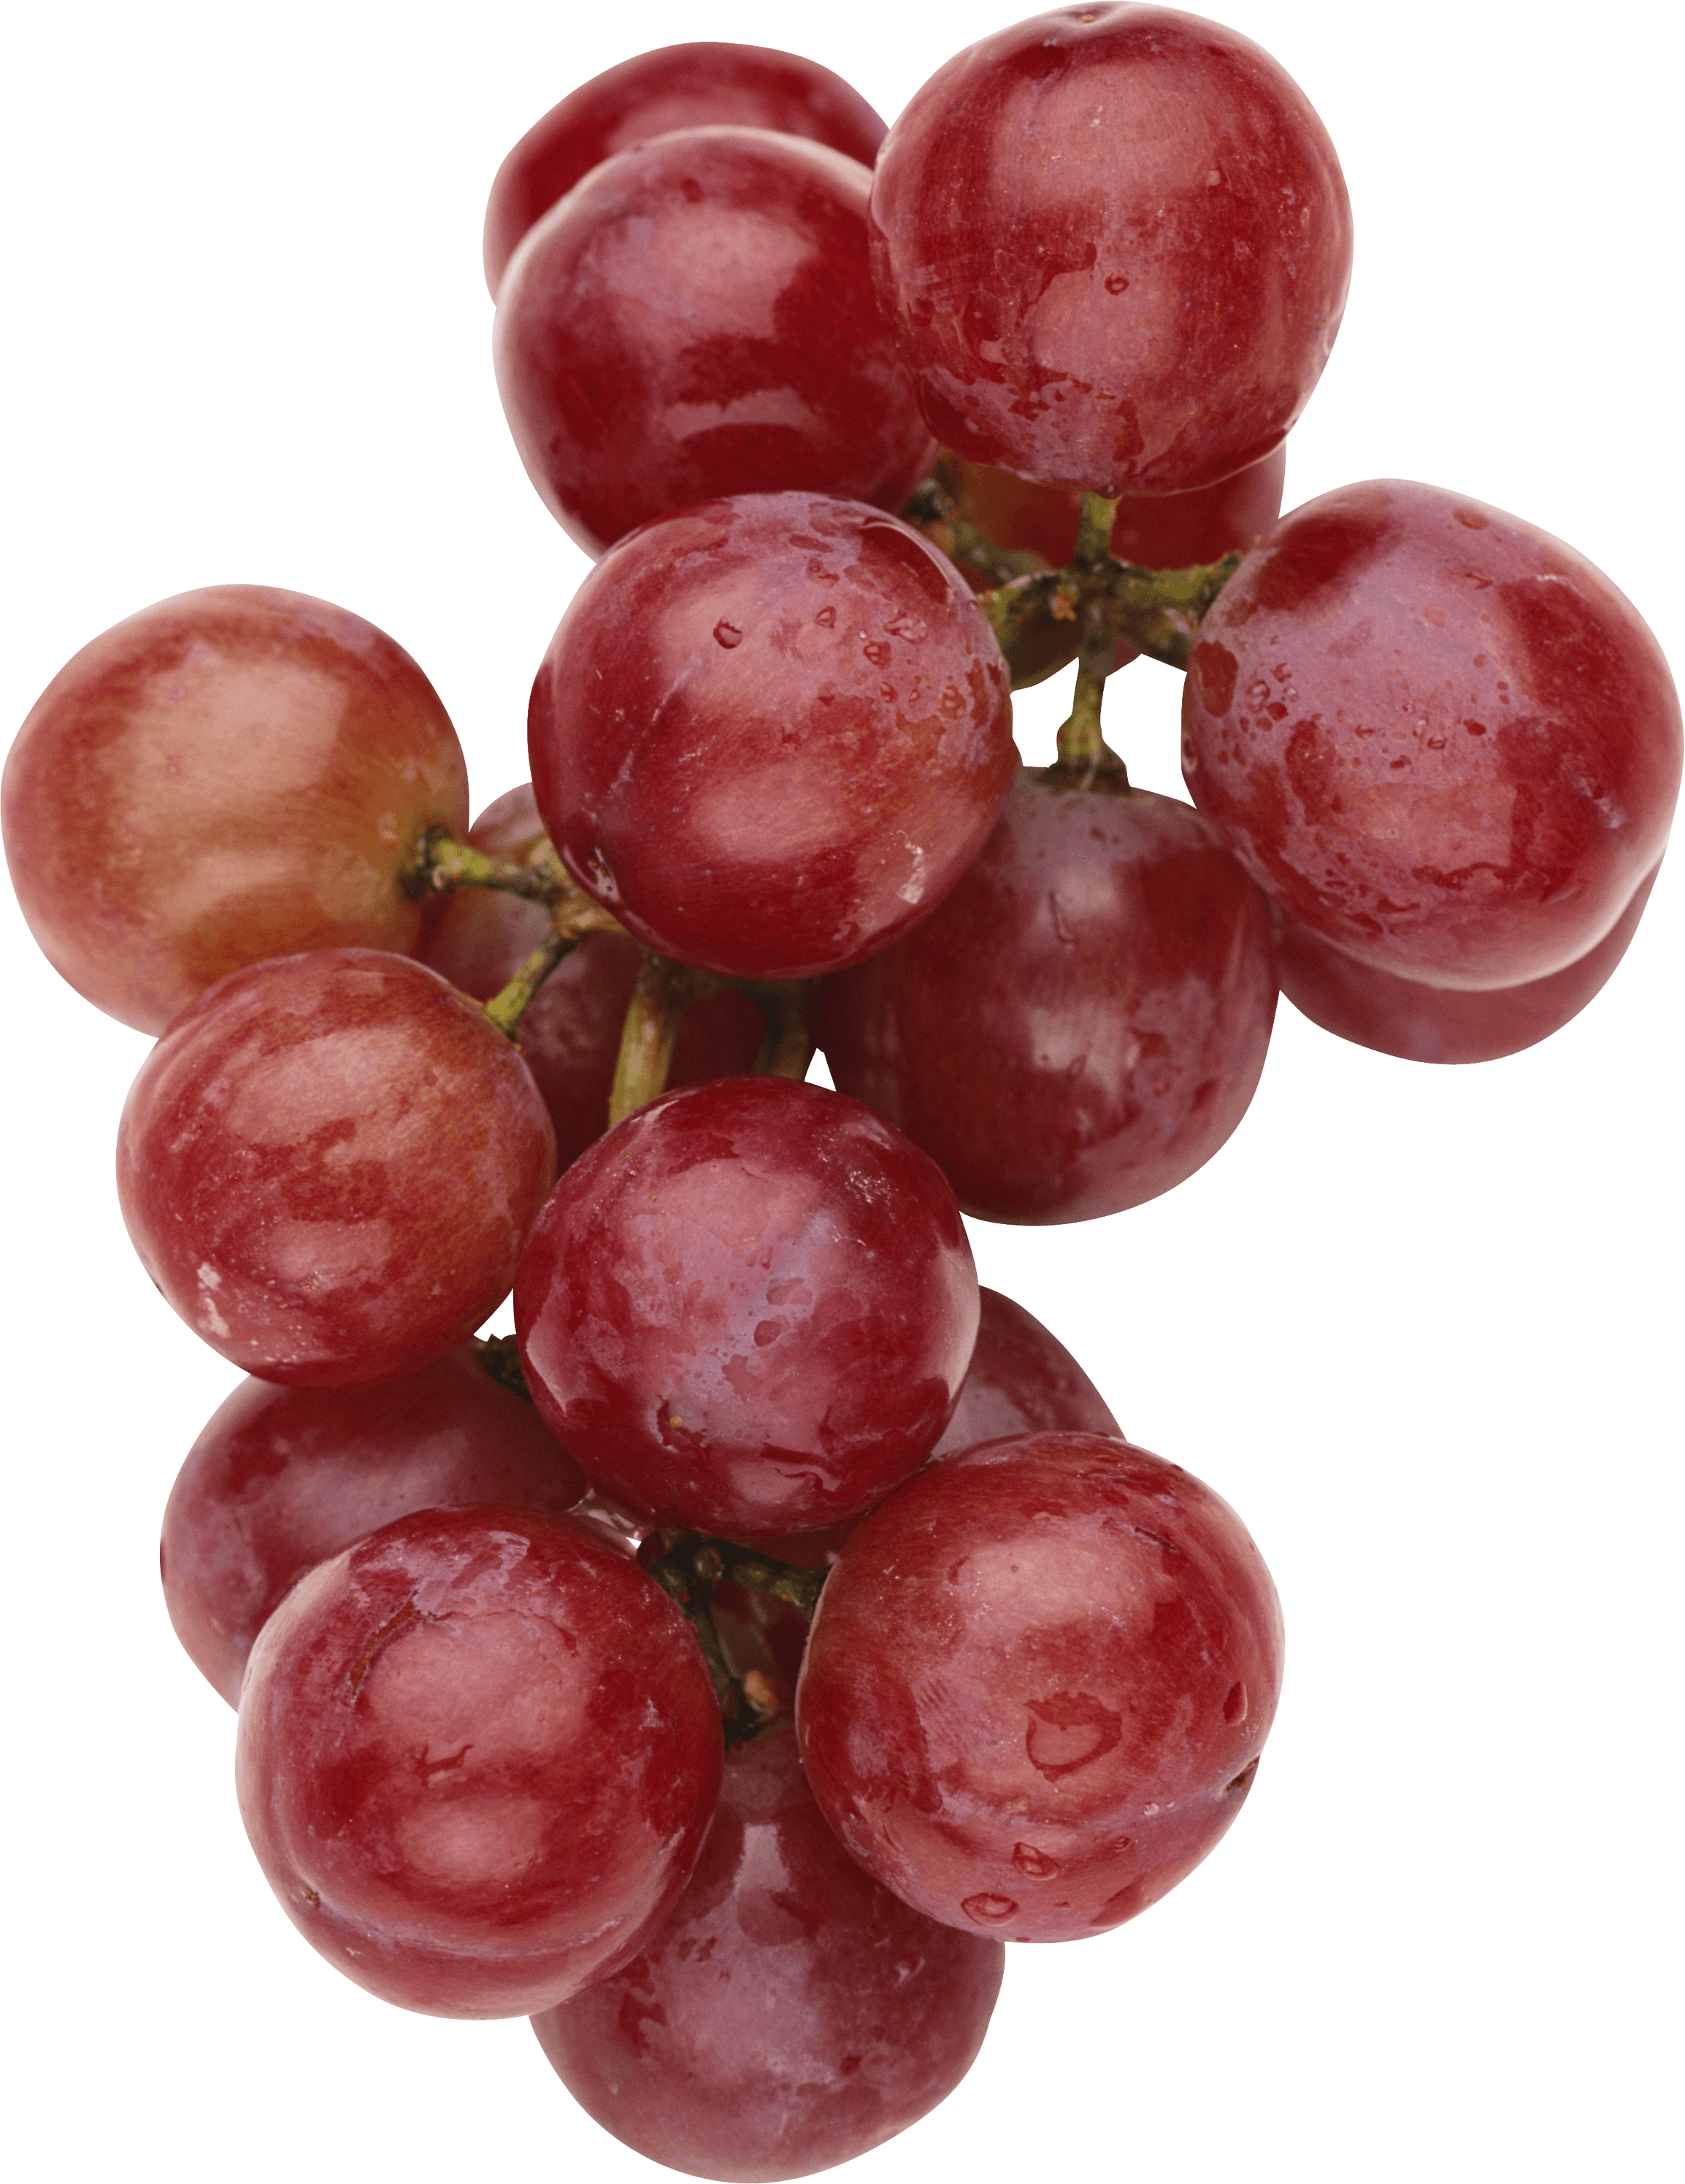 Download Grape Png Image HQ PNG Image in different resolution | FreePNGImg